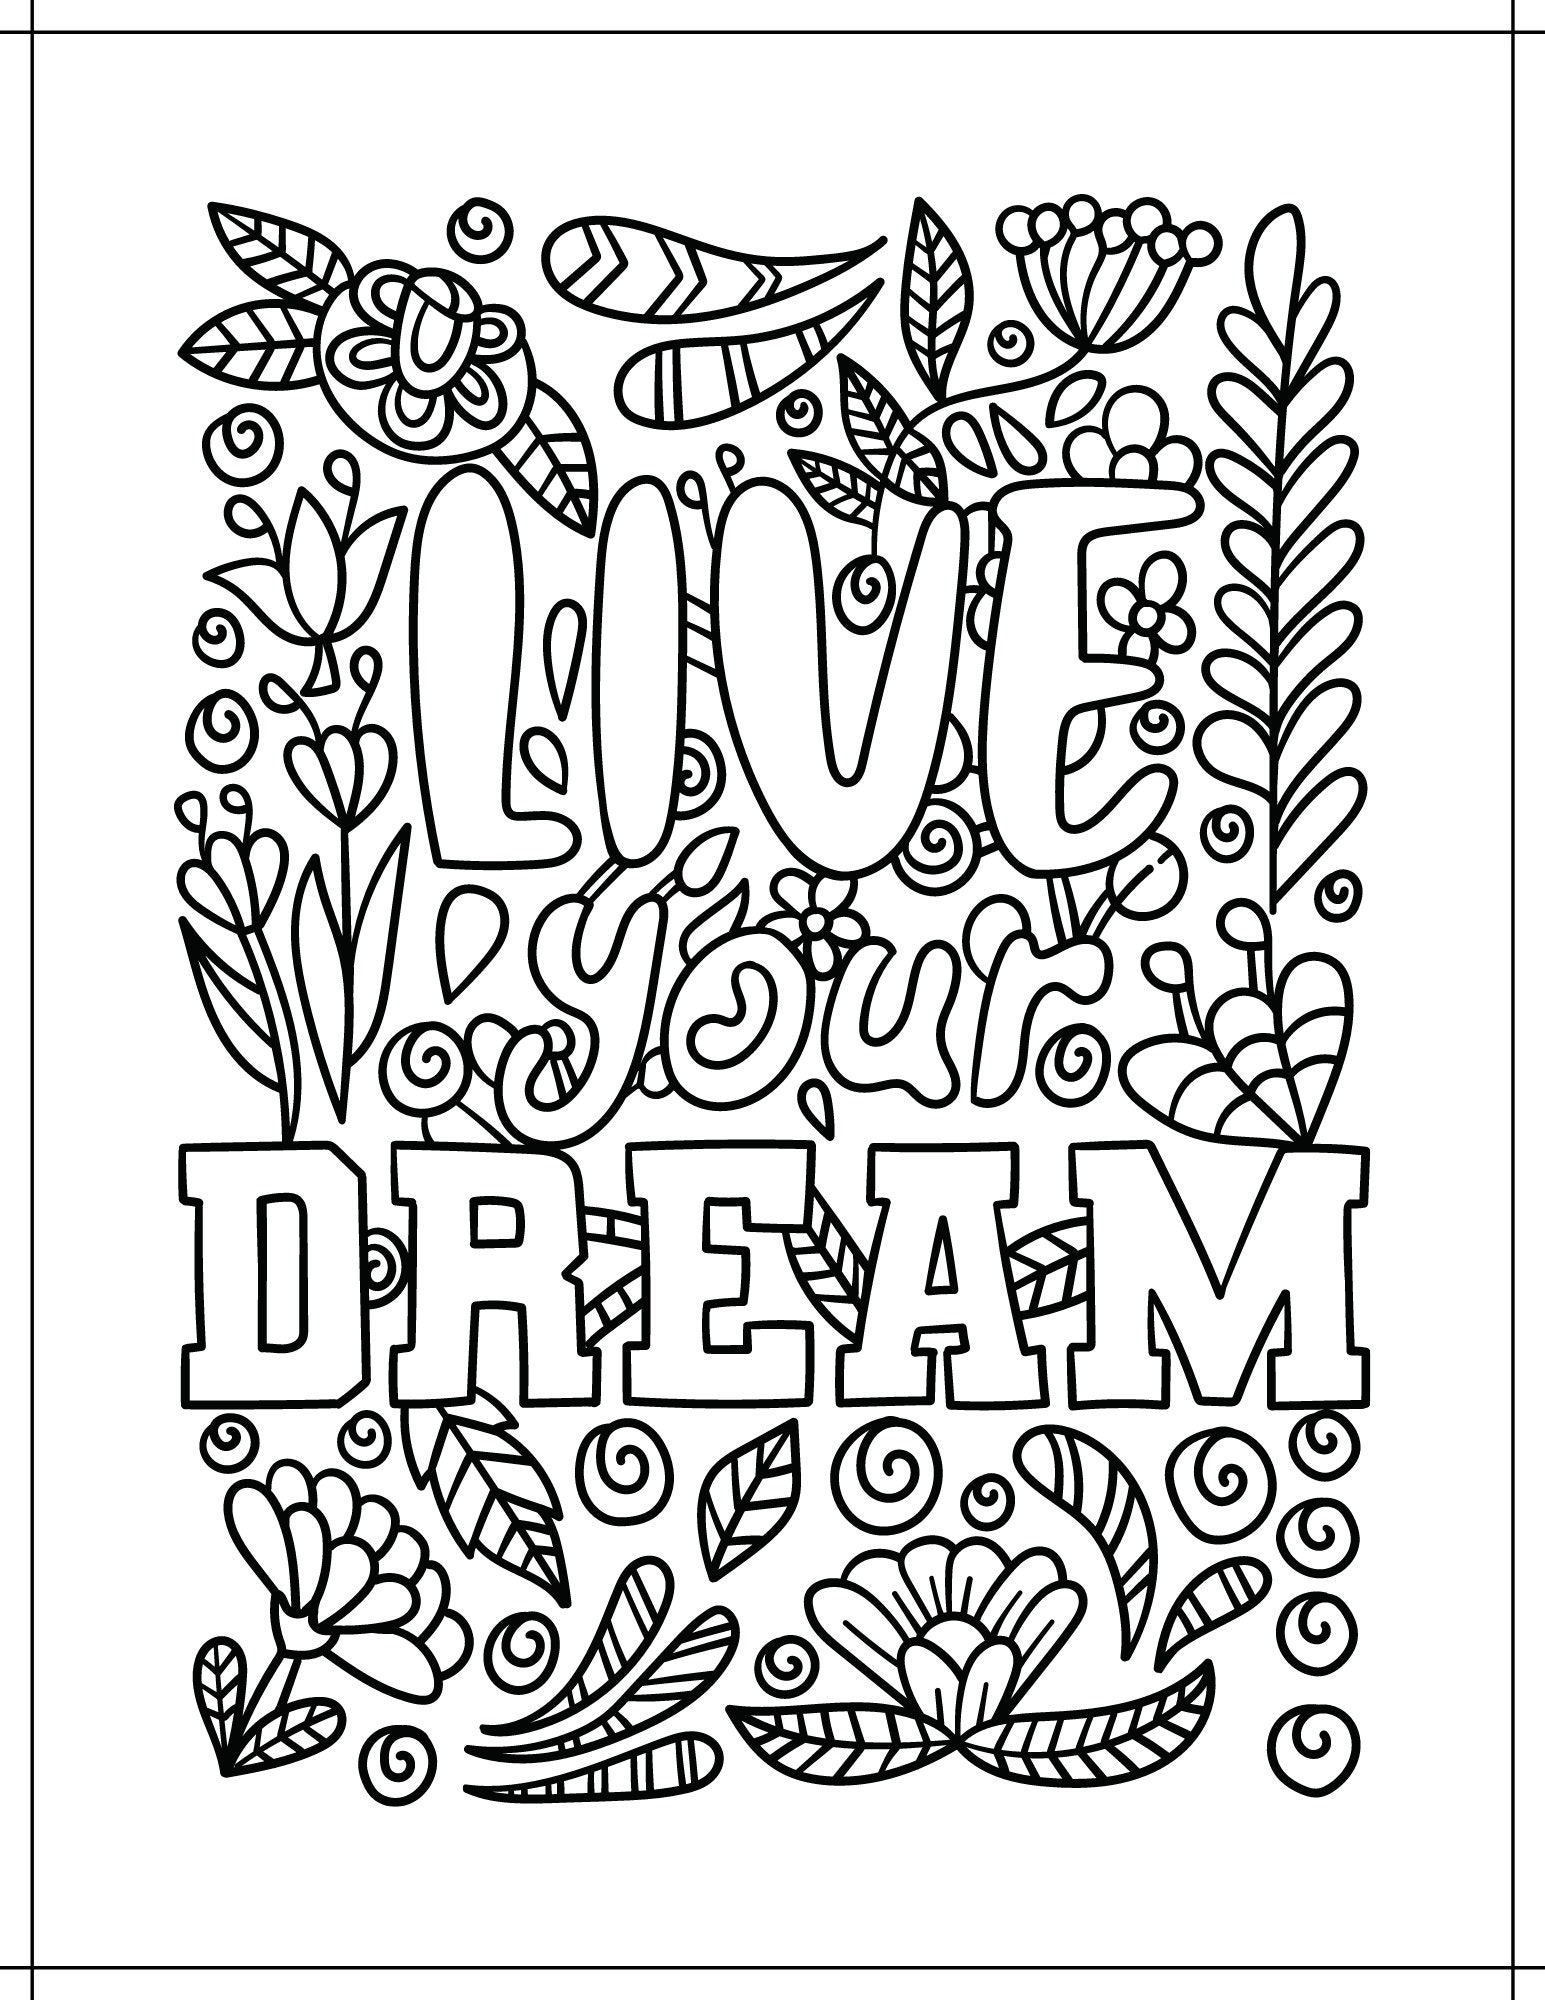 Motivational Coloring Pages for Teens and Adults * Moms and Crafters